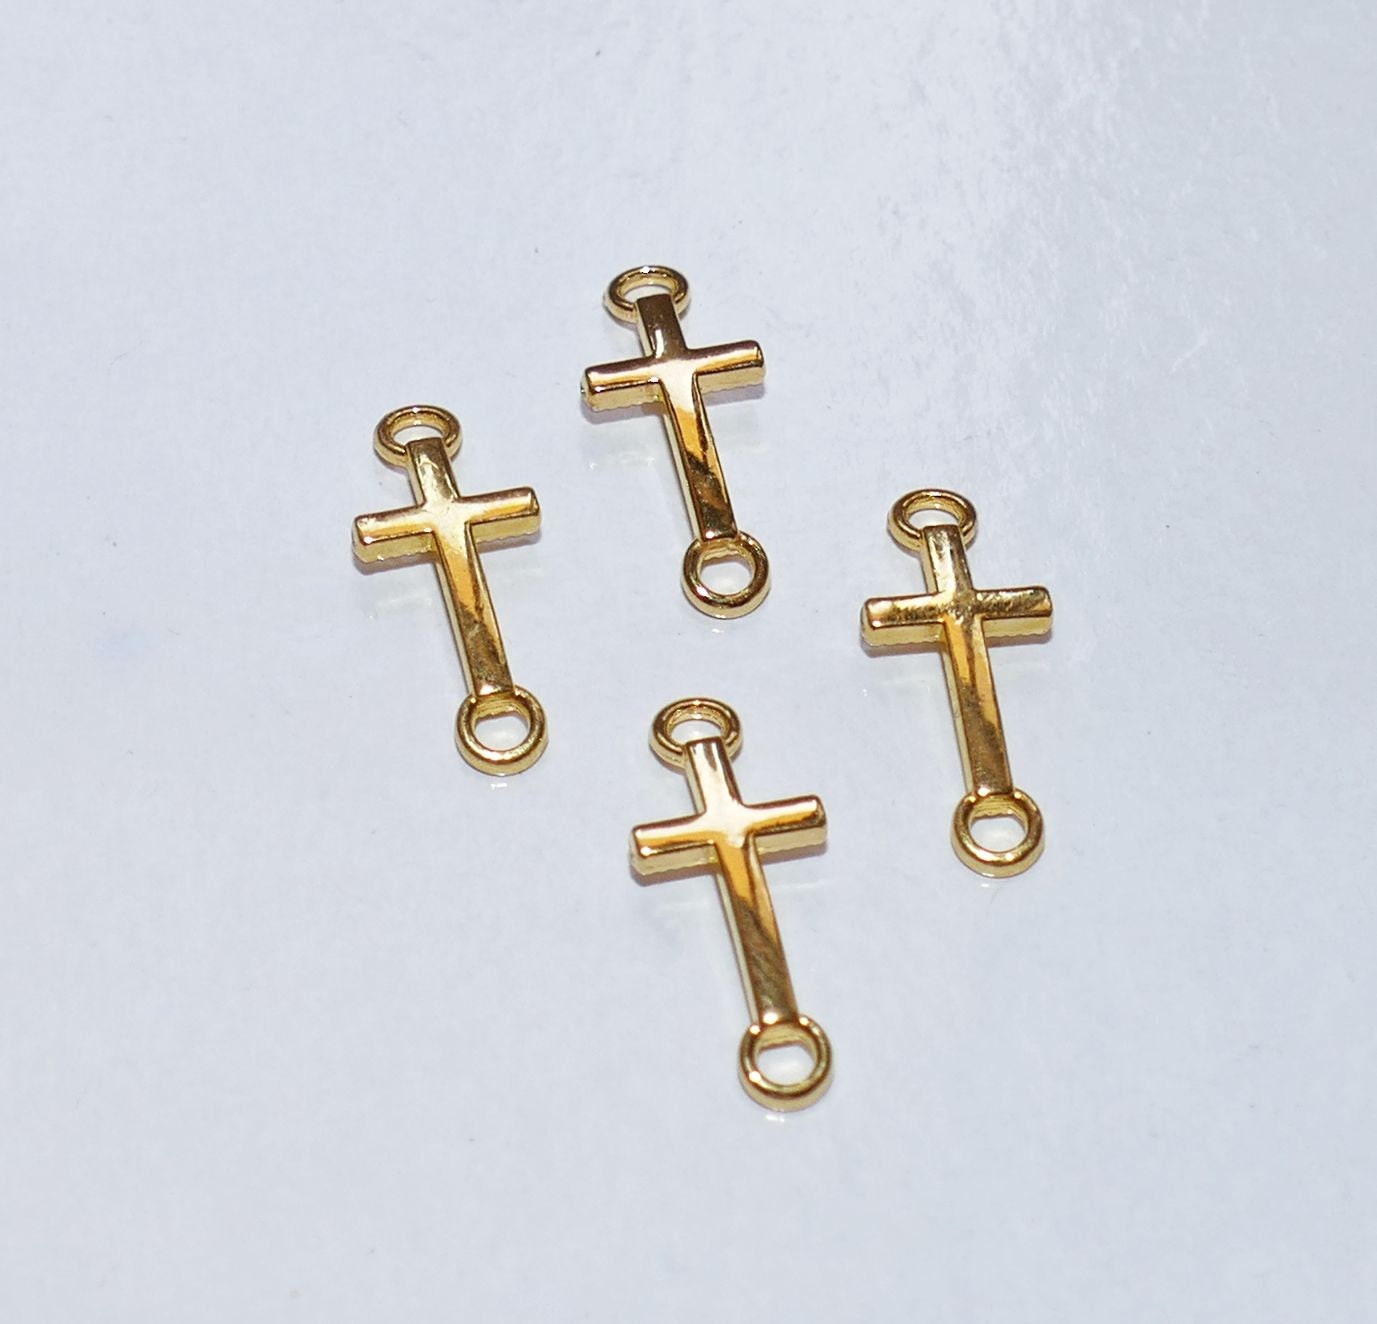 10x Cross Rosary Charm 2 Hole Connectors for Bracelet/Religious Earring  Supplies